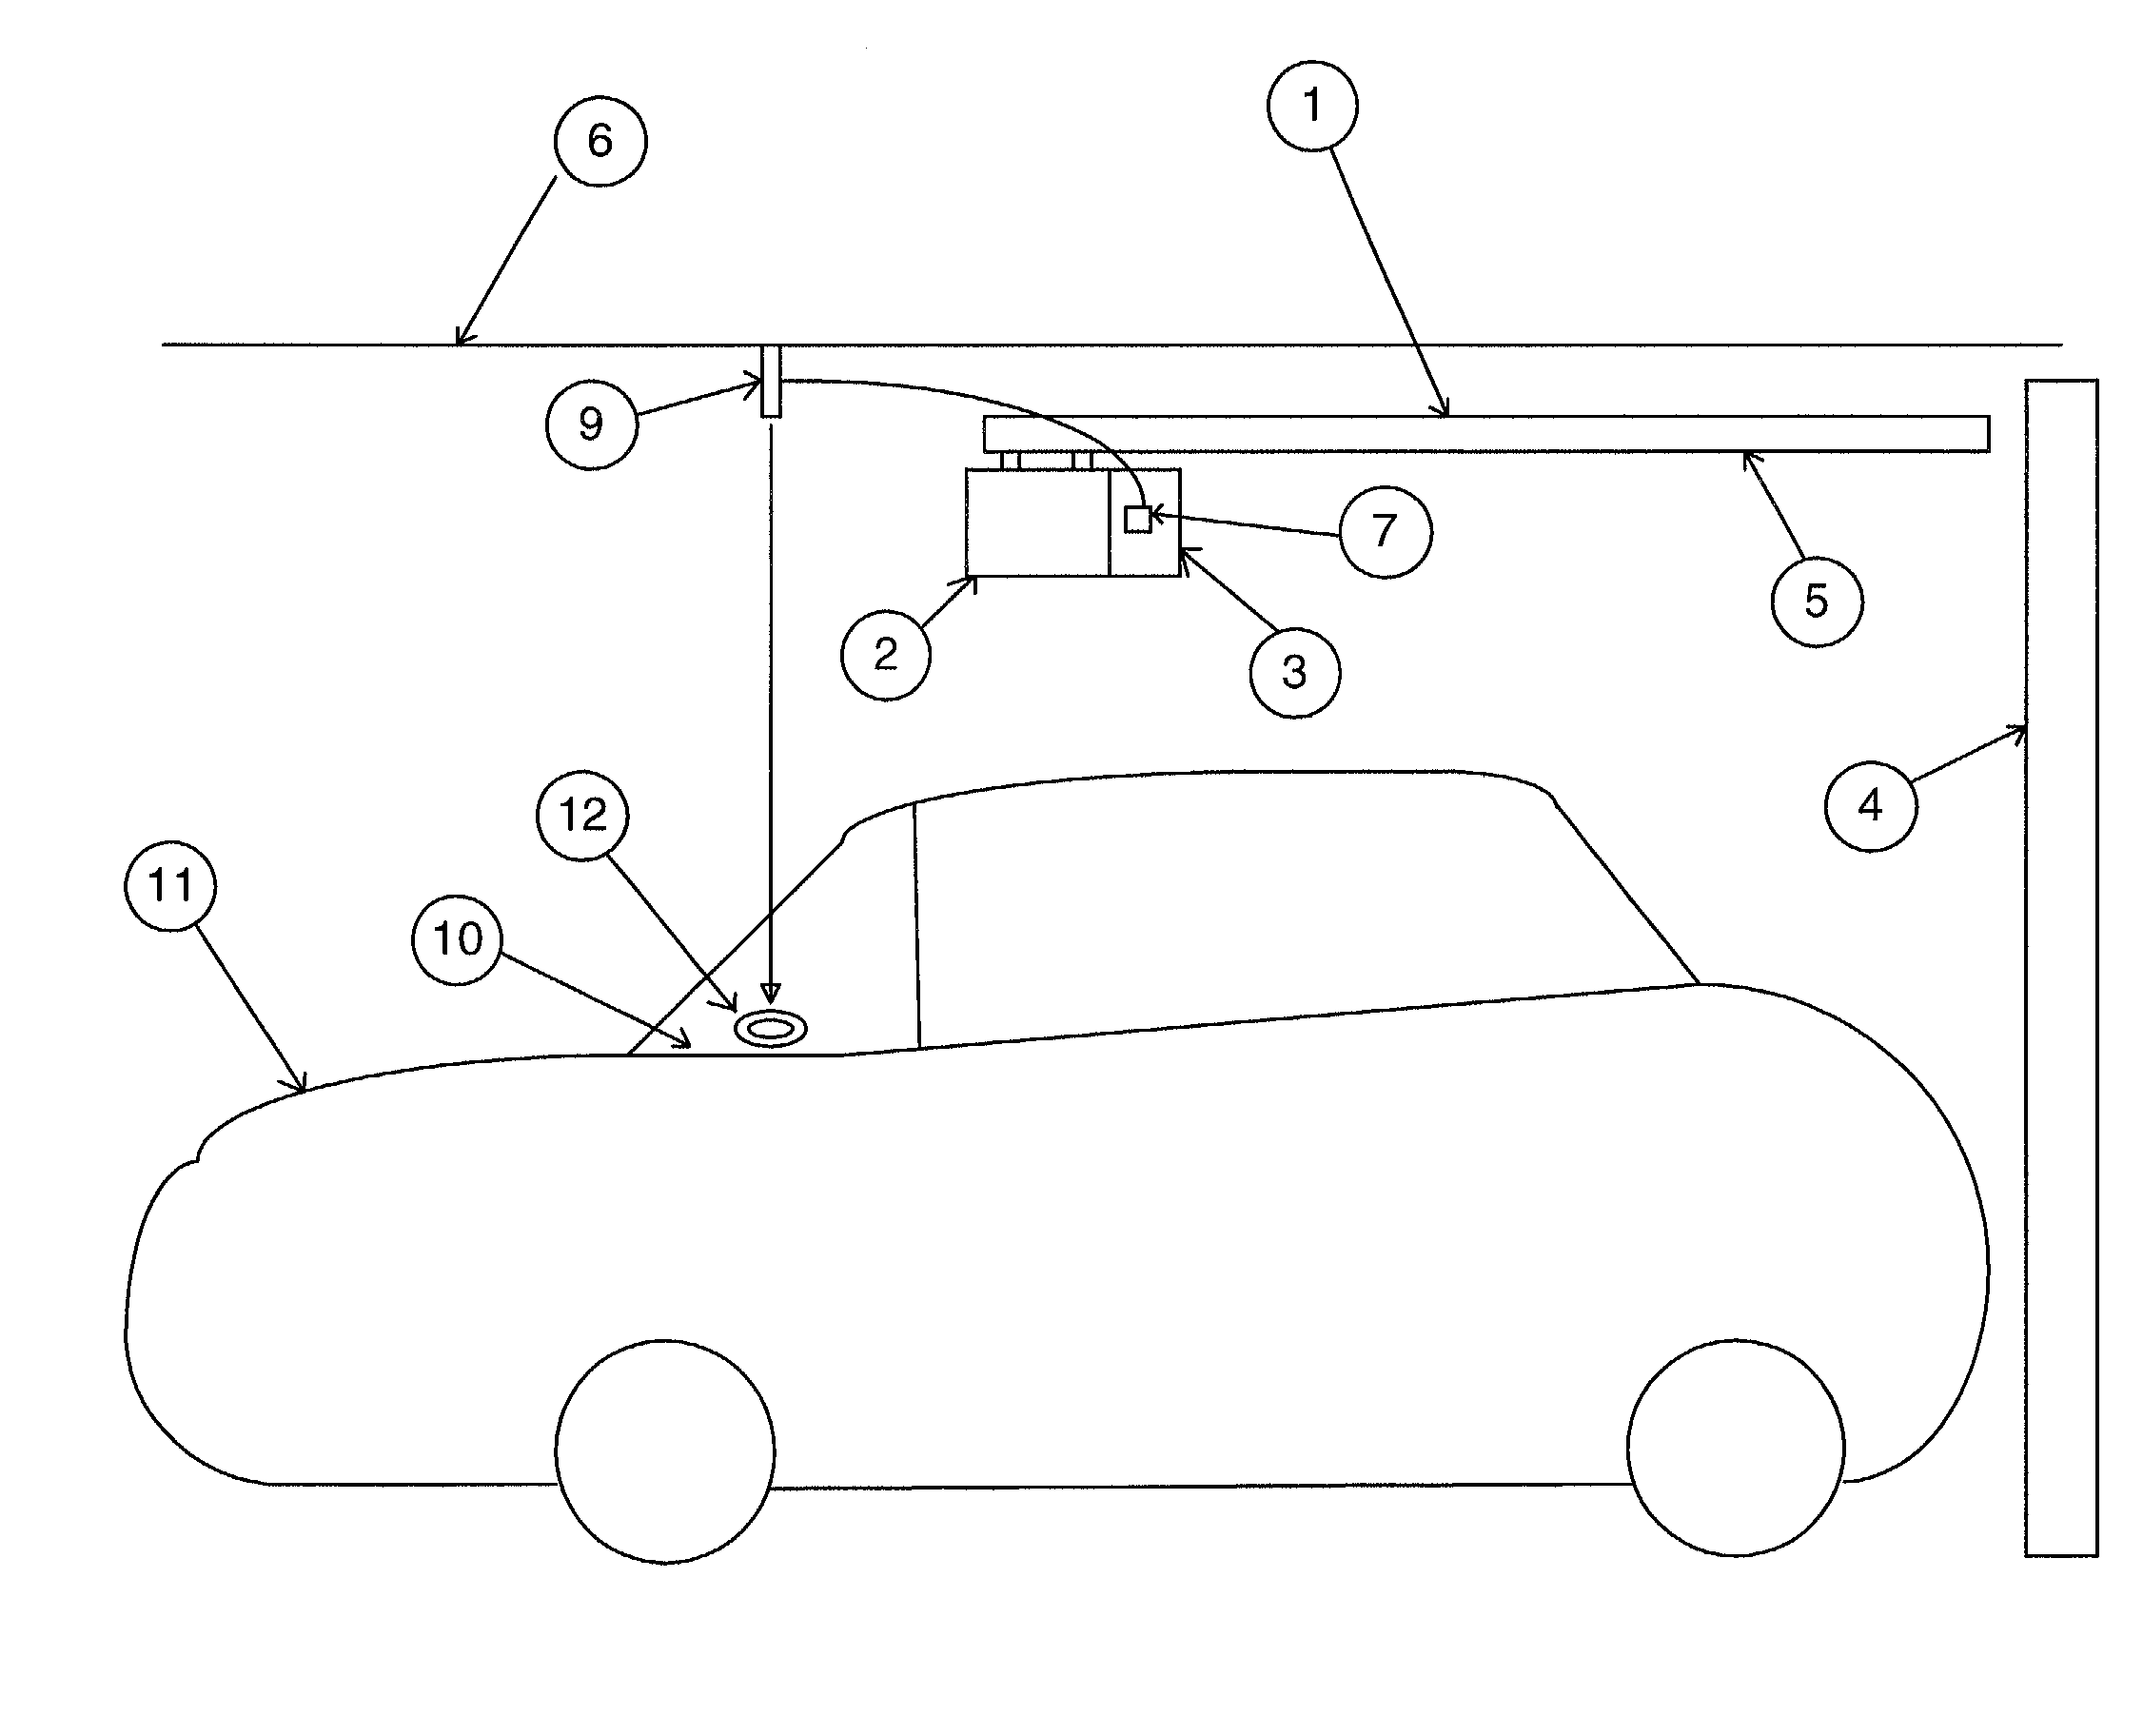 Light activated optical parking guide